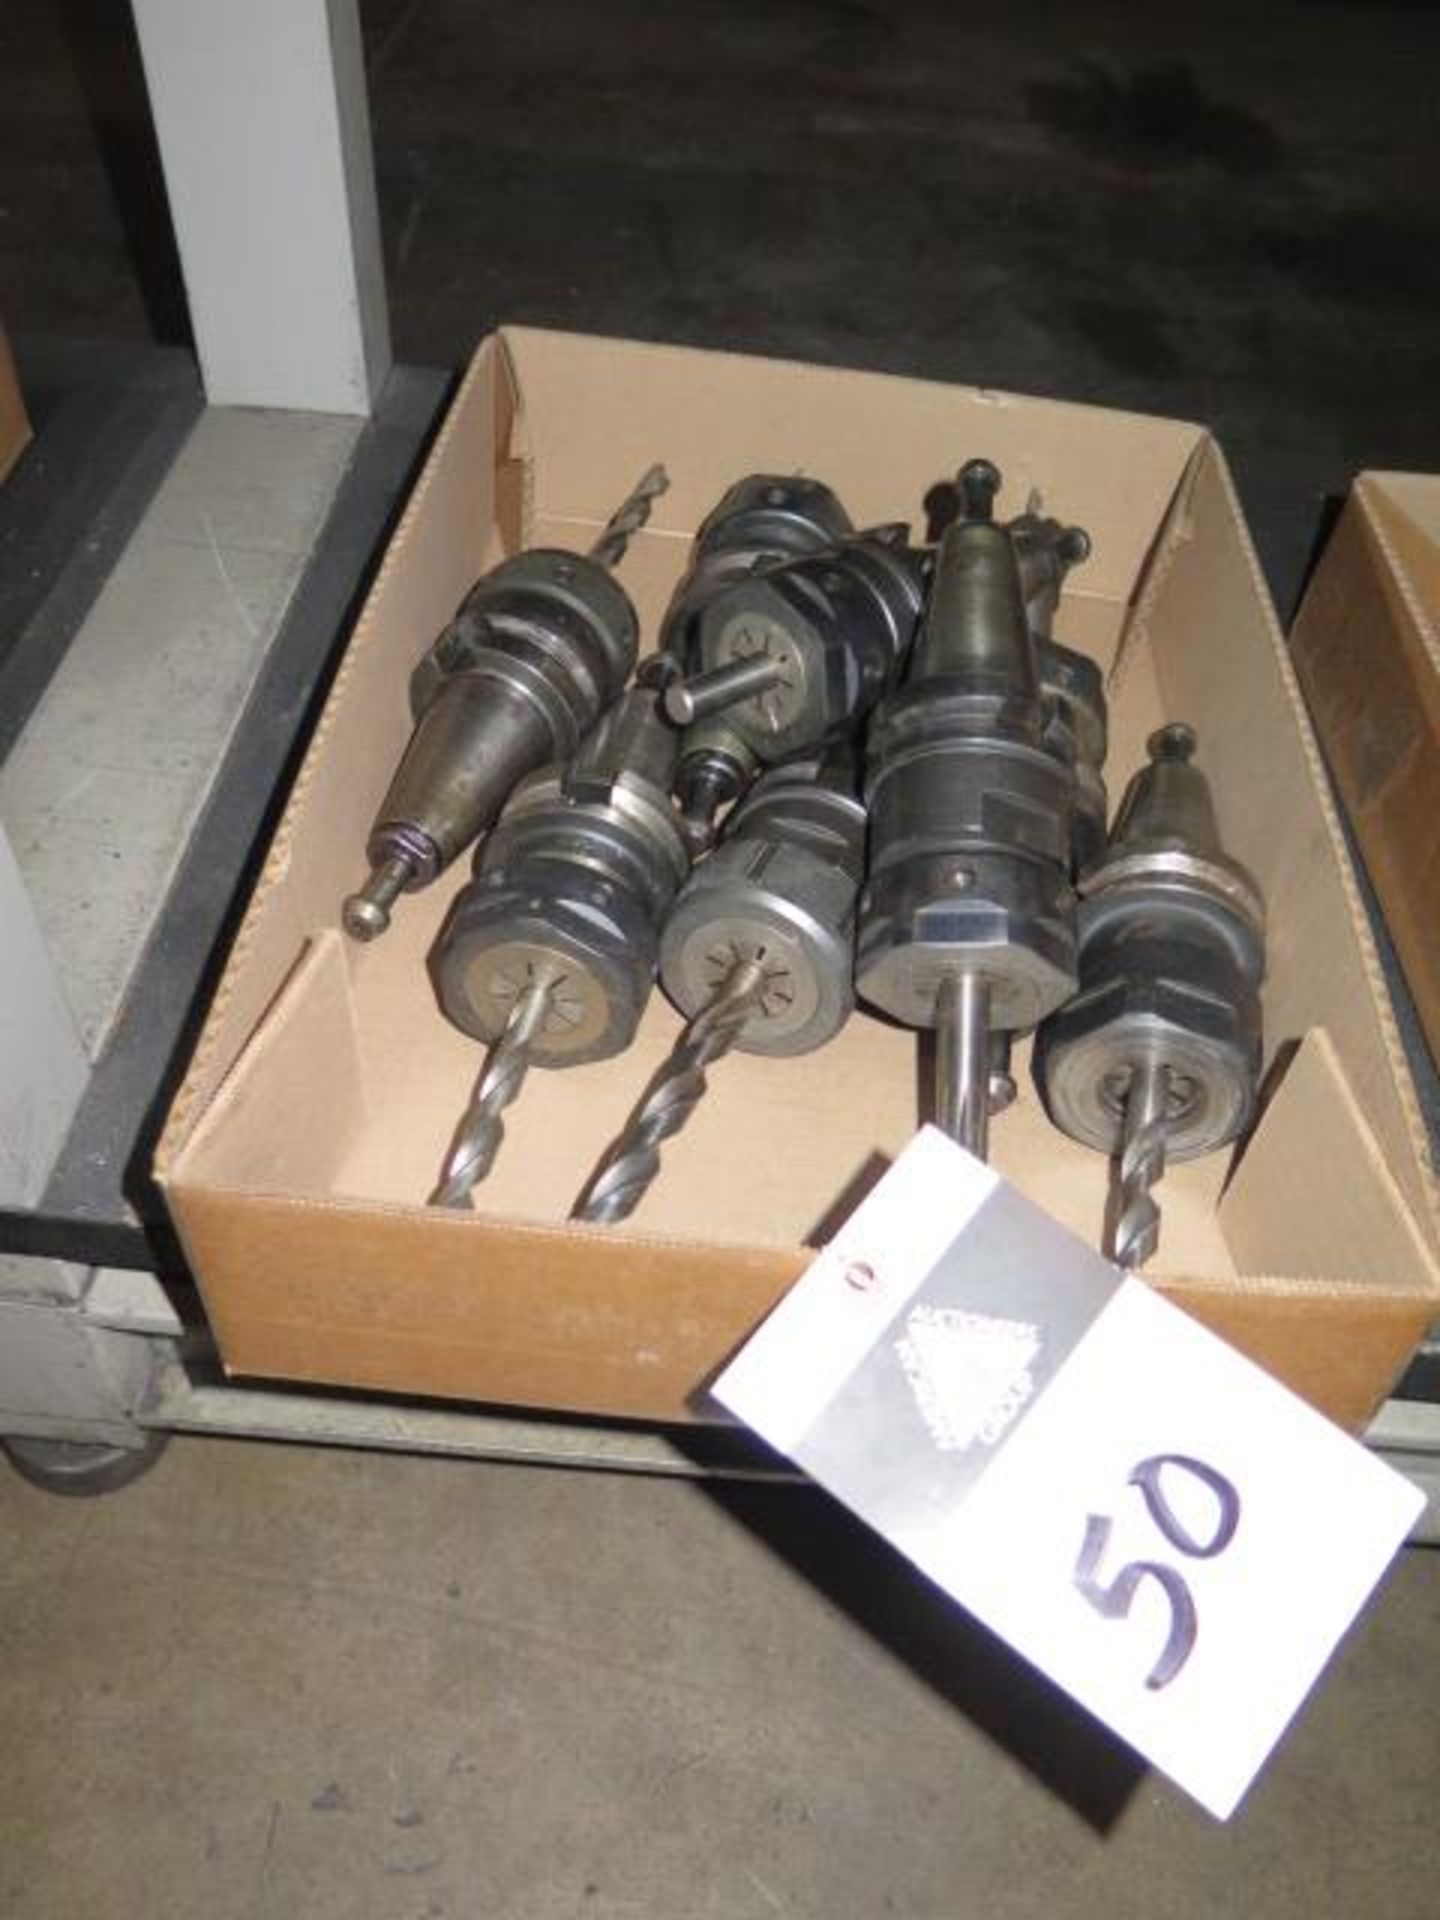 BT-40 Taper TG-100 Collet Chucks (8) (SOLD AS-IS - NO WARRANTY)